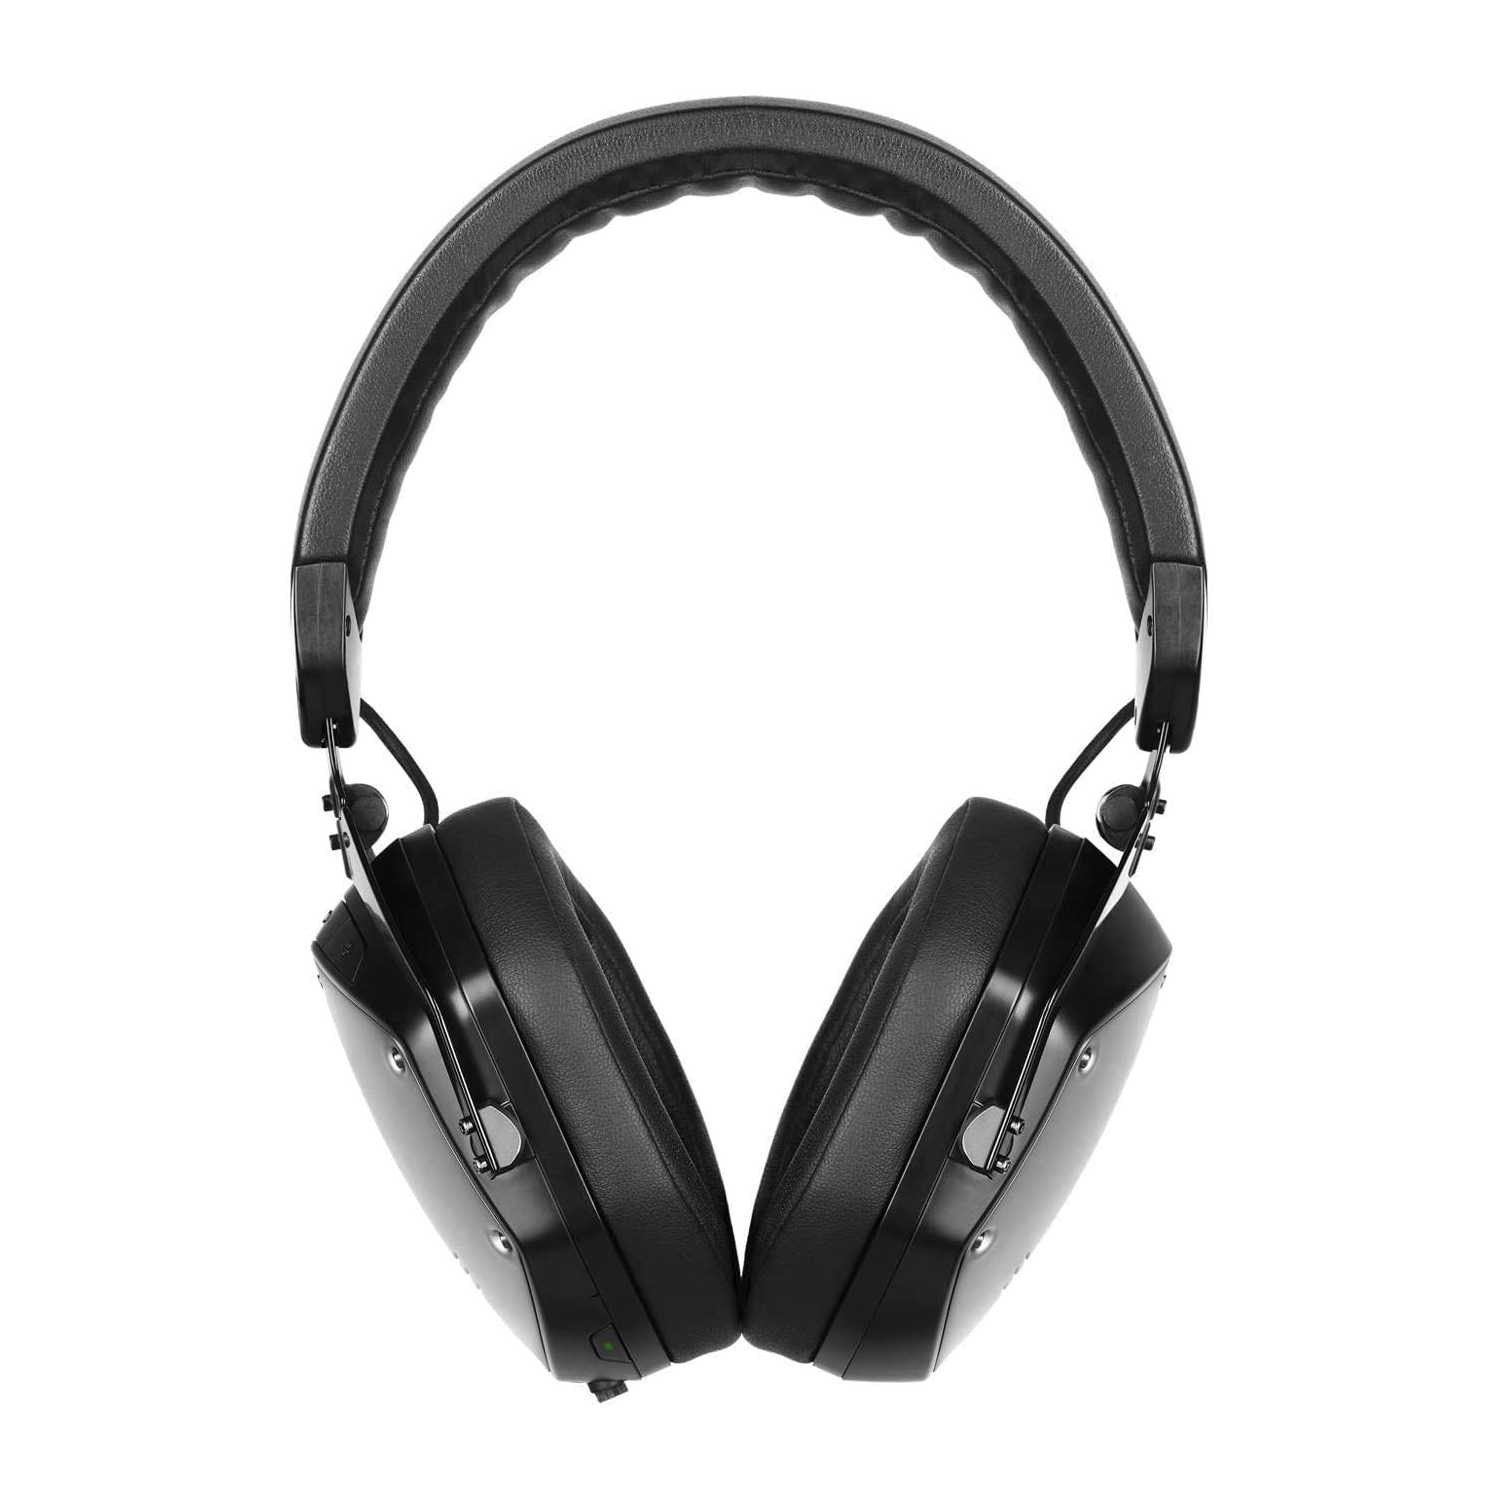 V-MODA M-200 ANC Noise Cancelling Wireless Bluetooth Over-Ear